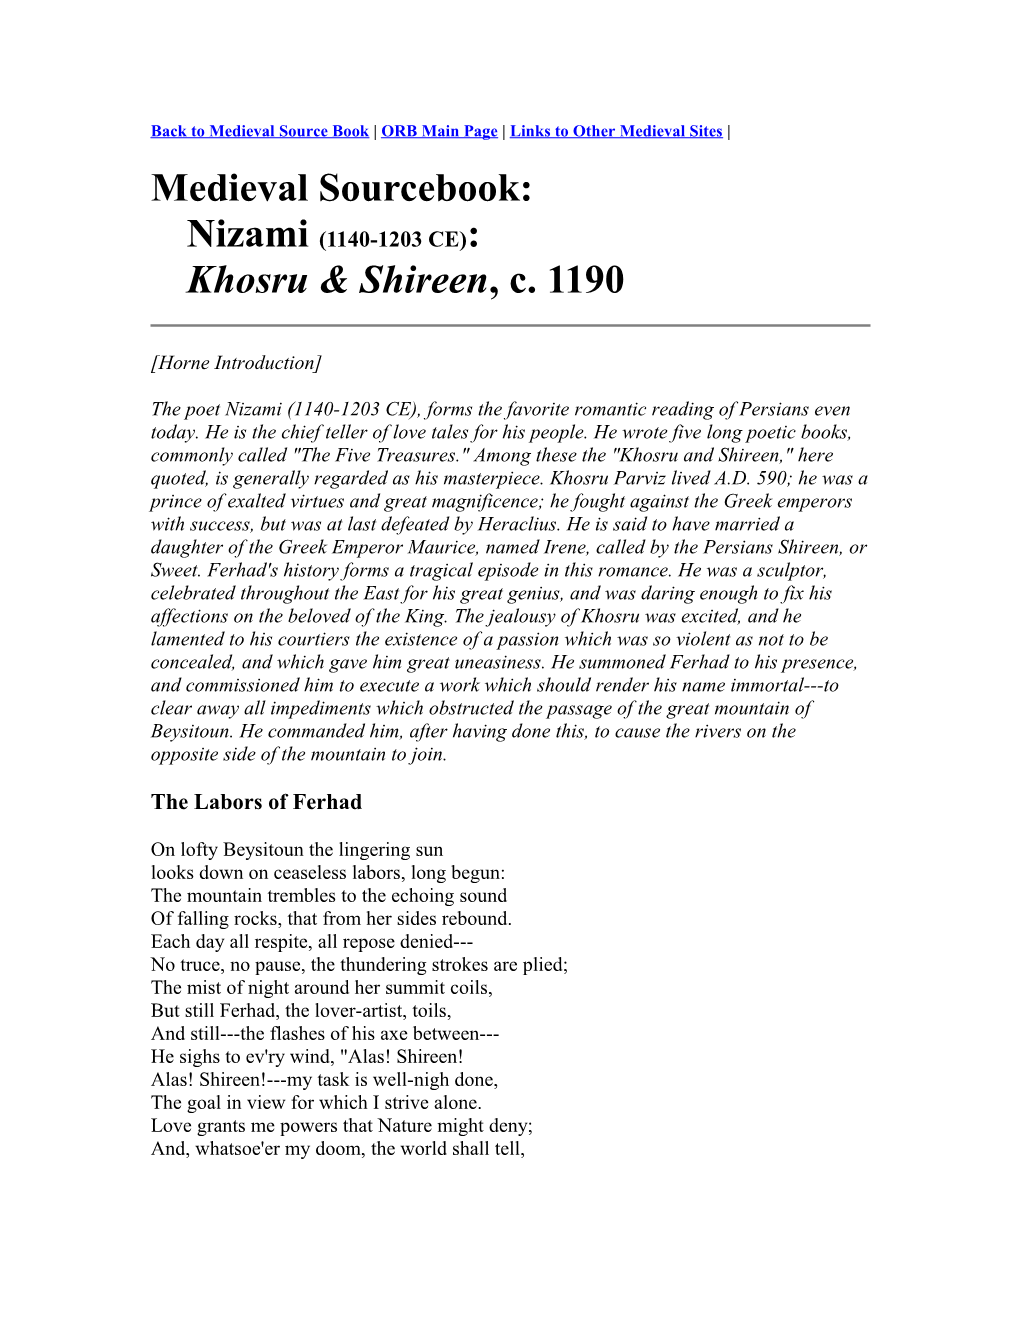 Back to Medieval Source Book ORB Main Page Links to Other Medieval Sites